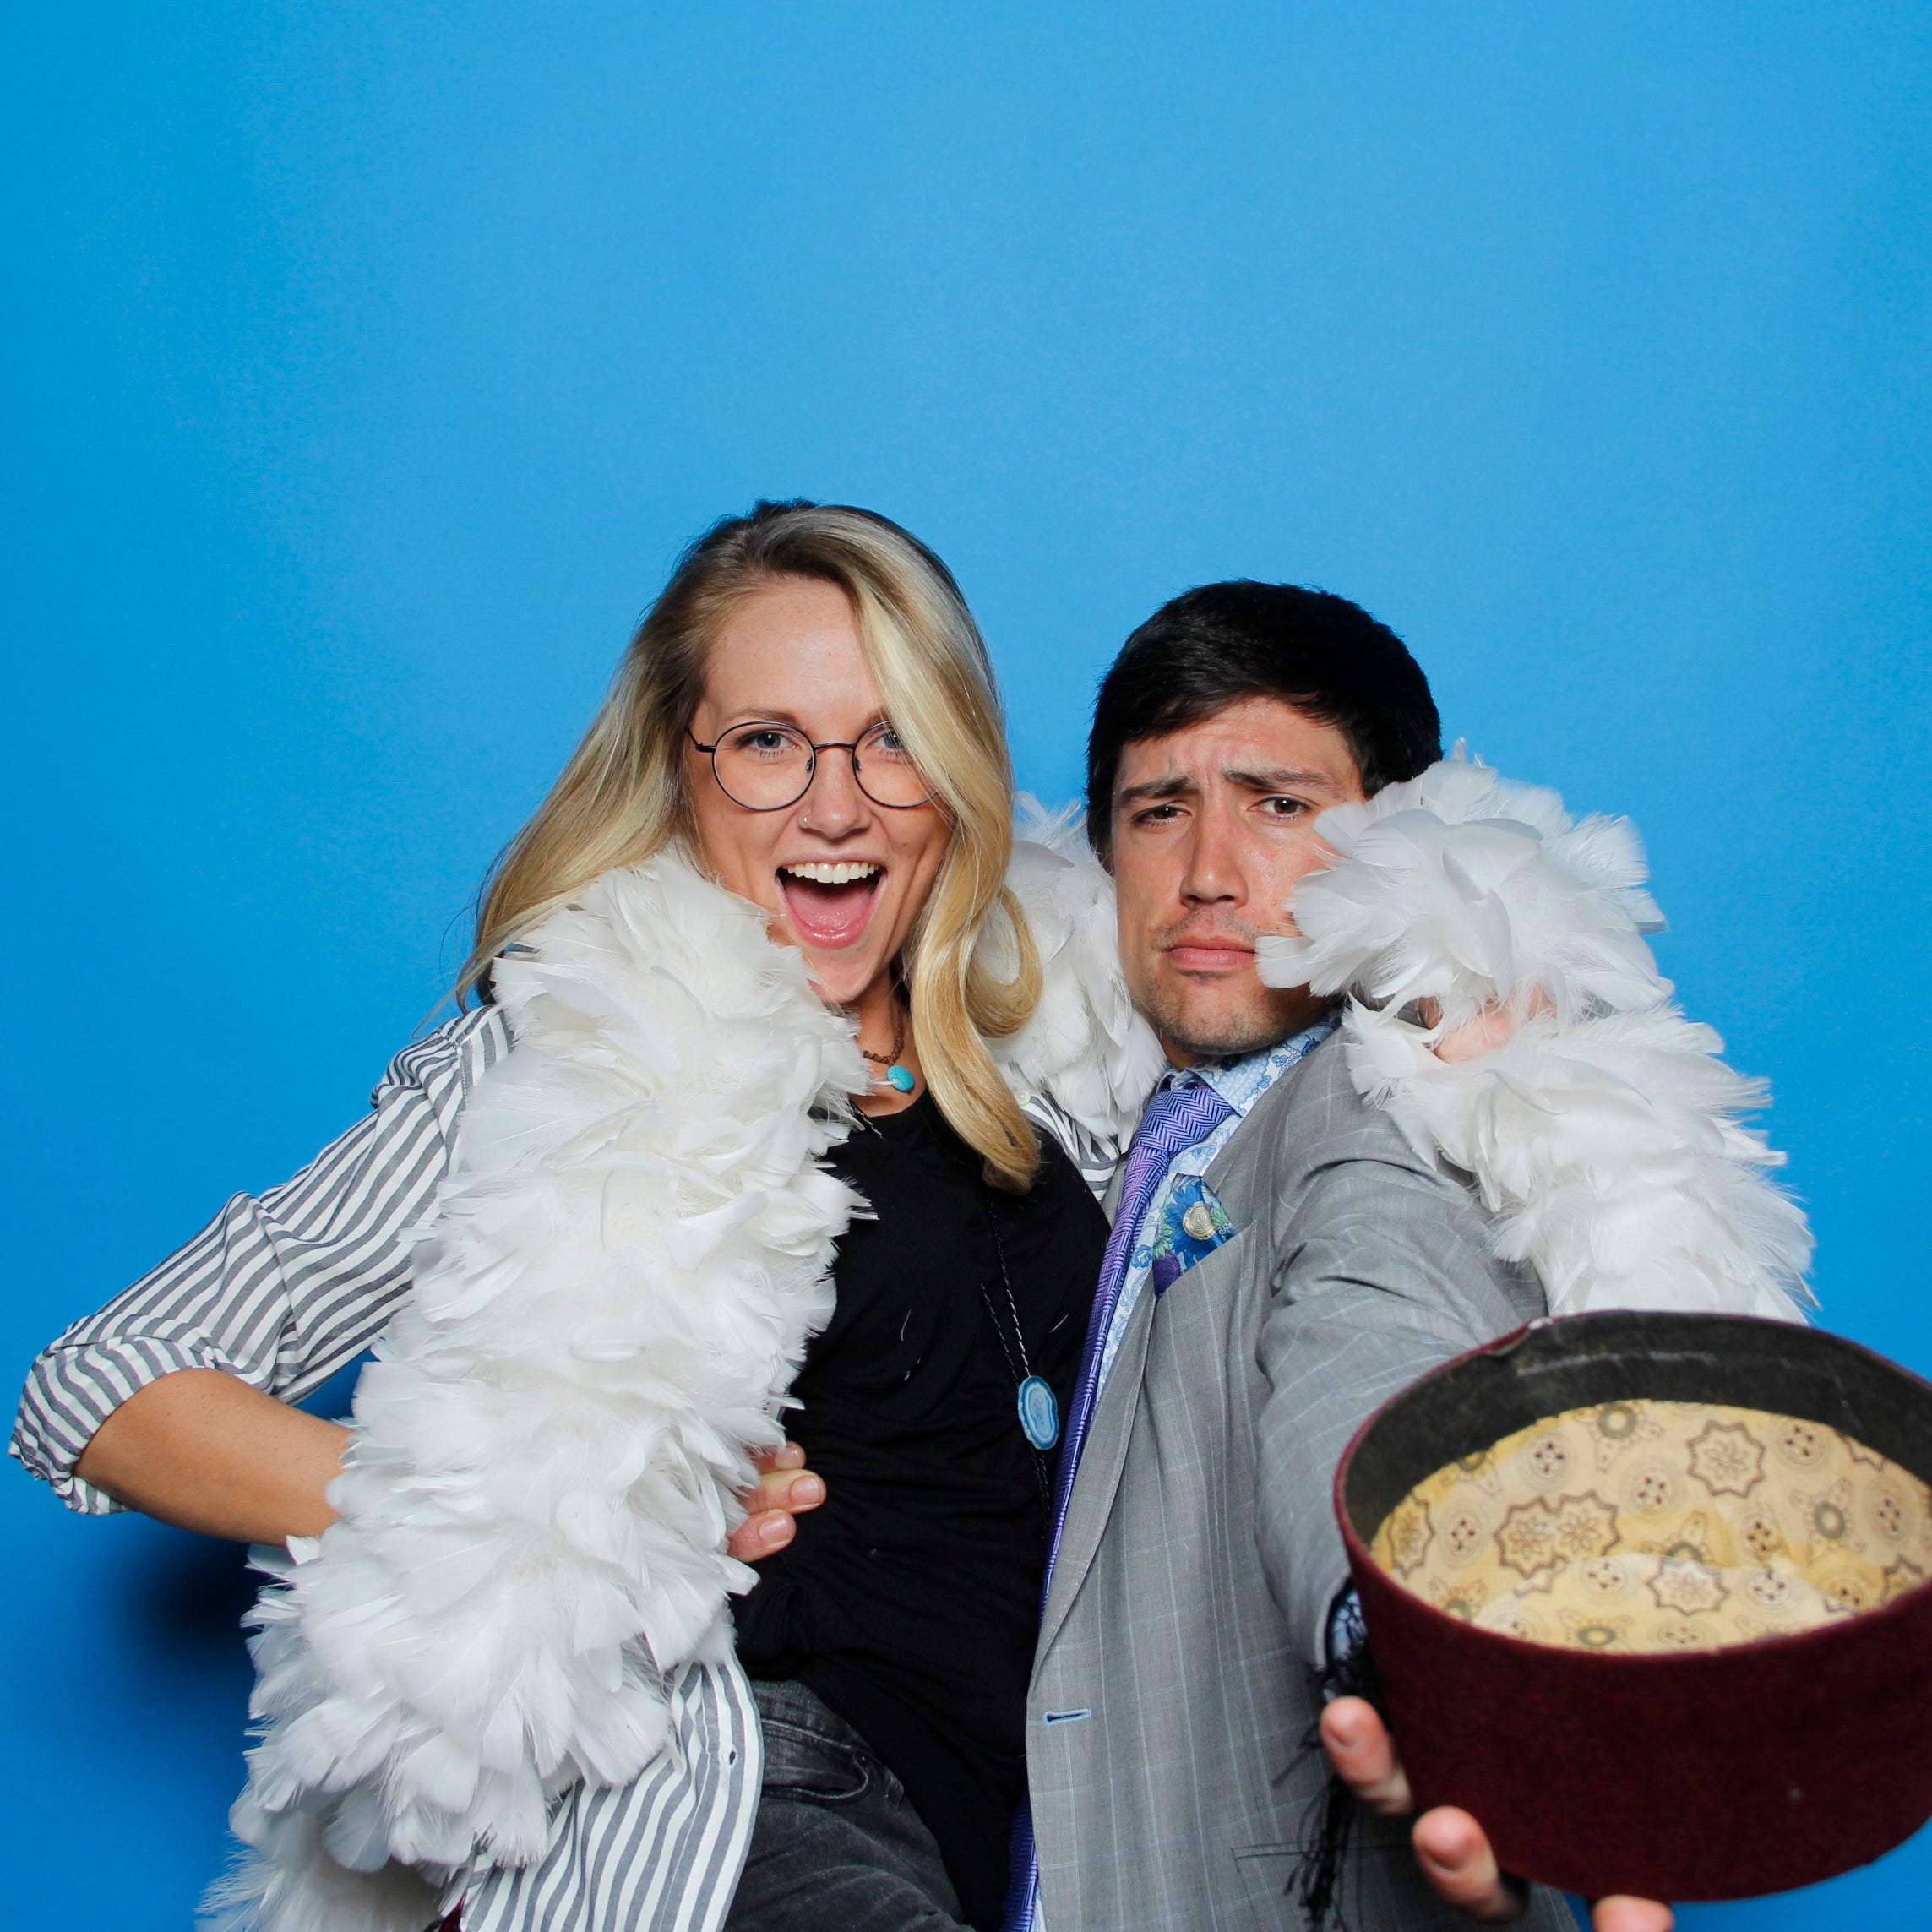 Couple posing for photo booth pictures in front of a bright blue backdrop